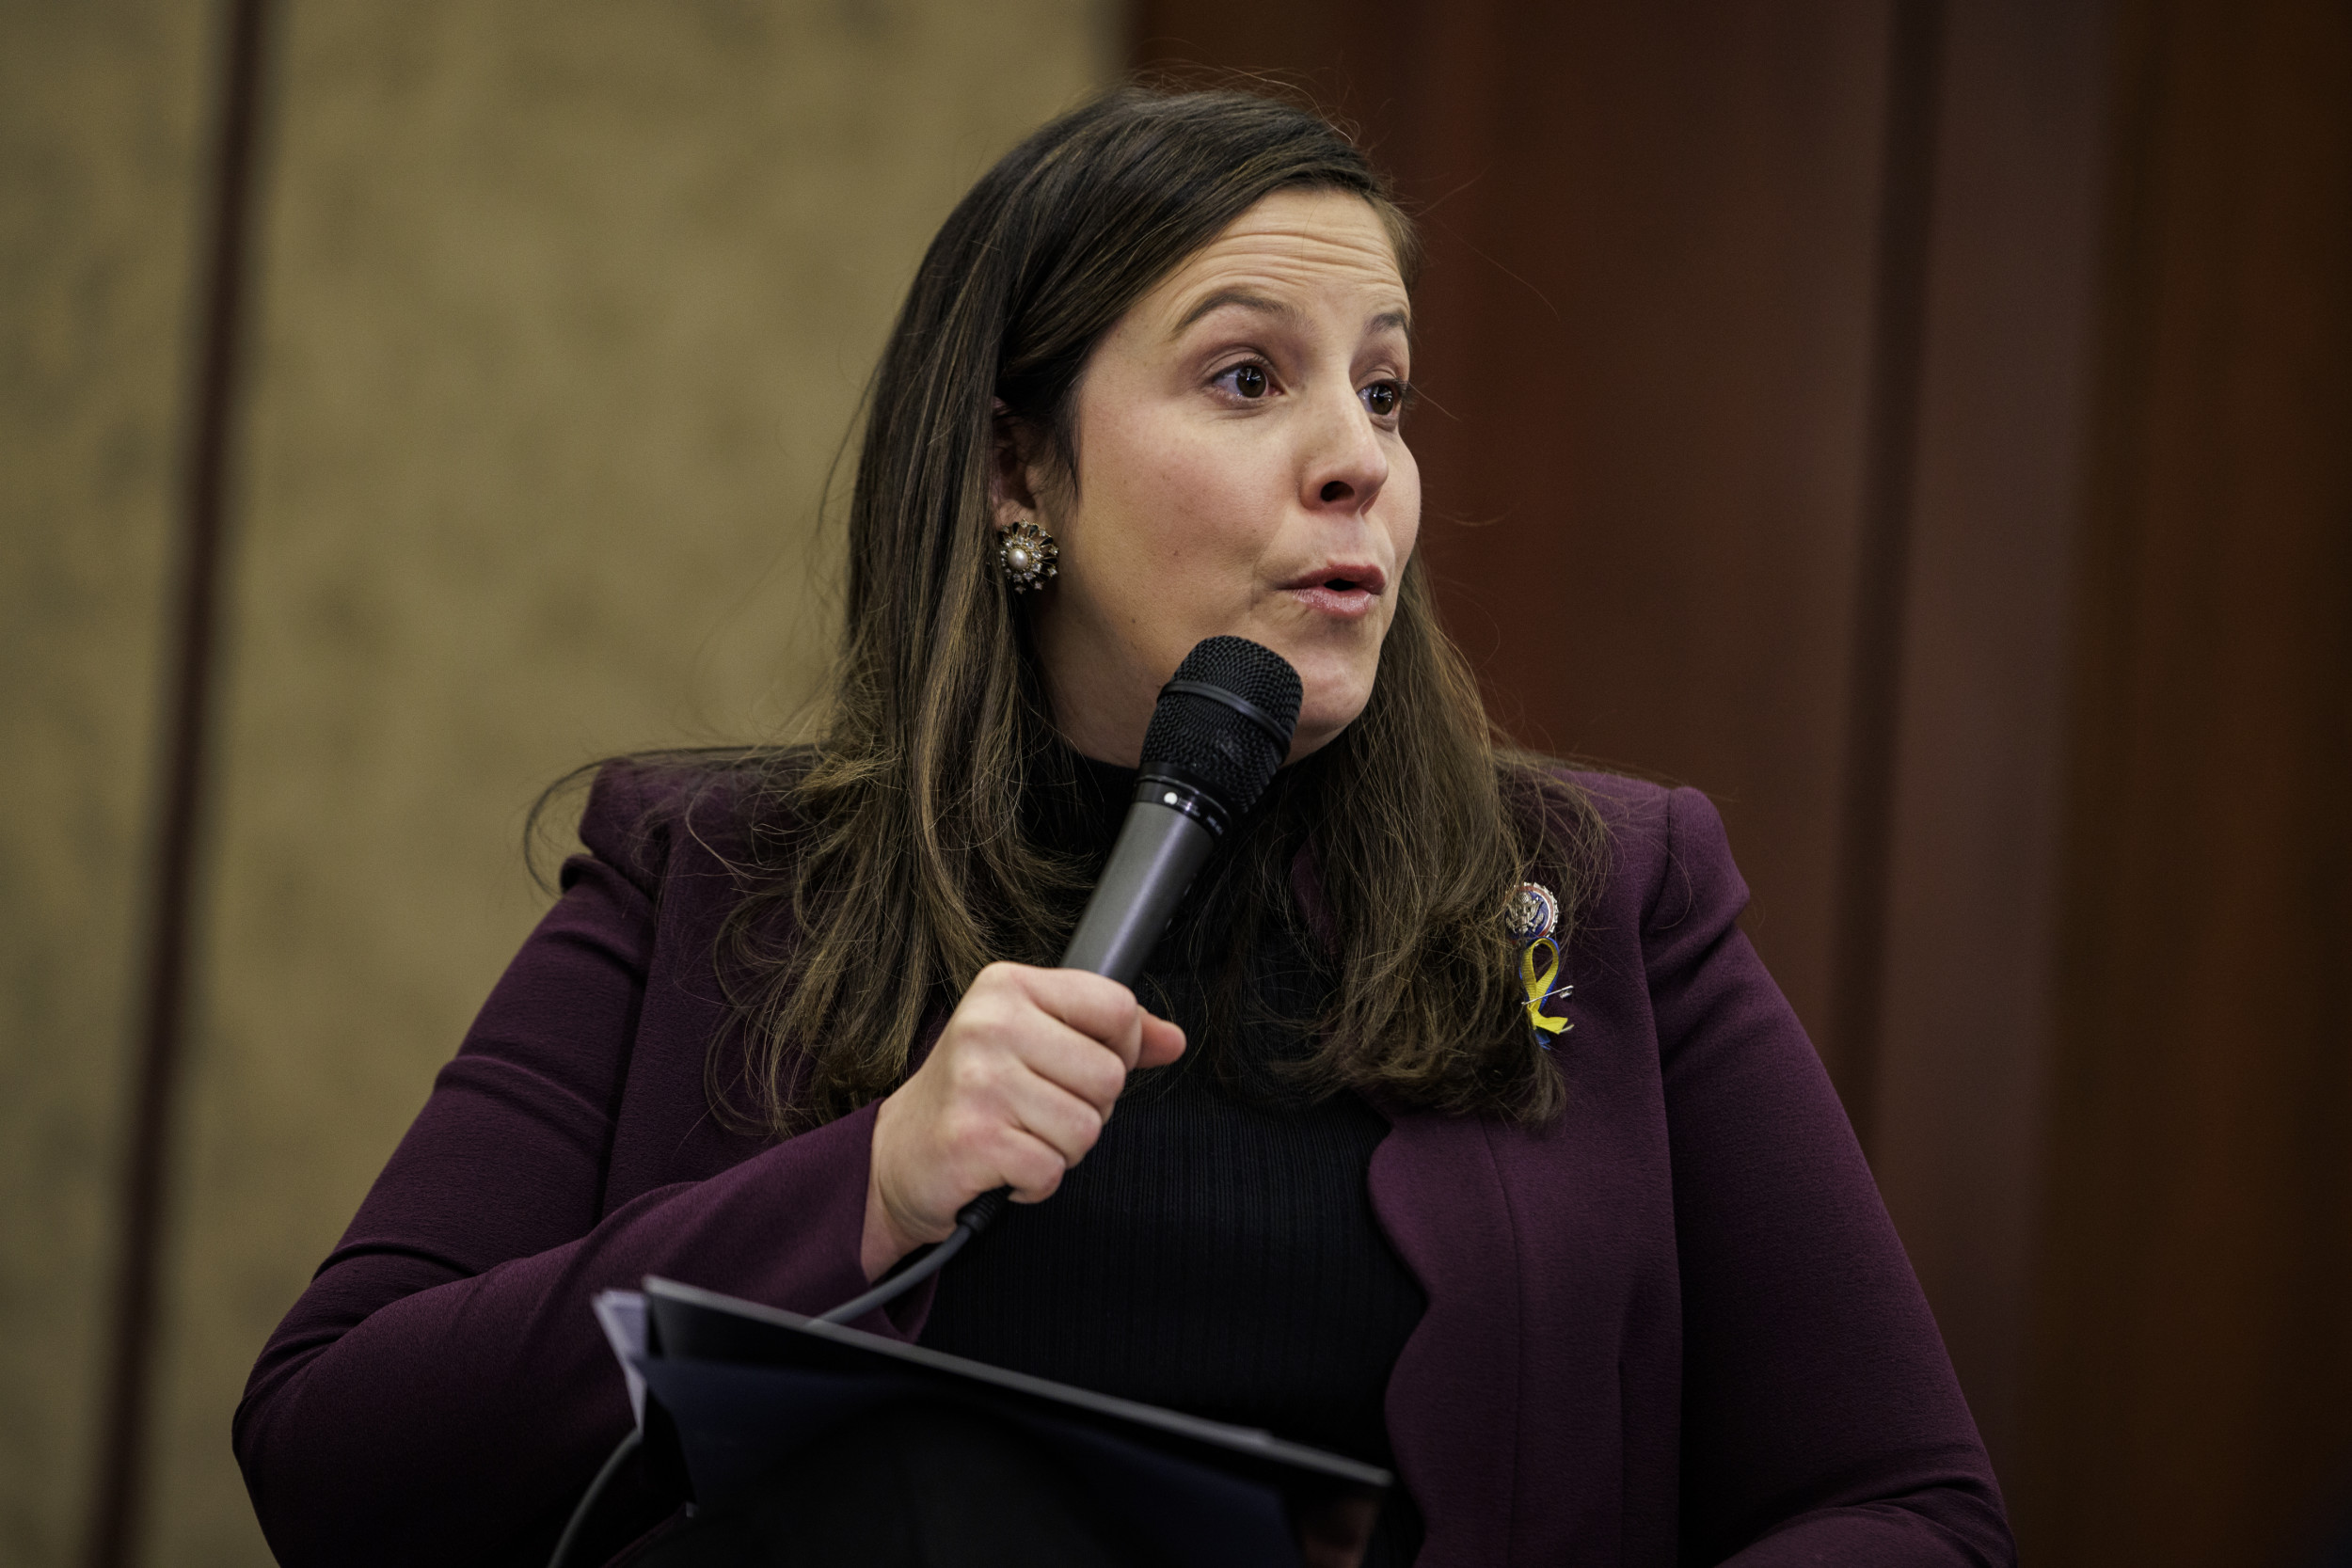 Fox News Host Confronts Stefanik on Migrant Buses: 'These Are Real People'